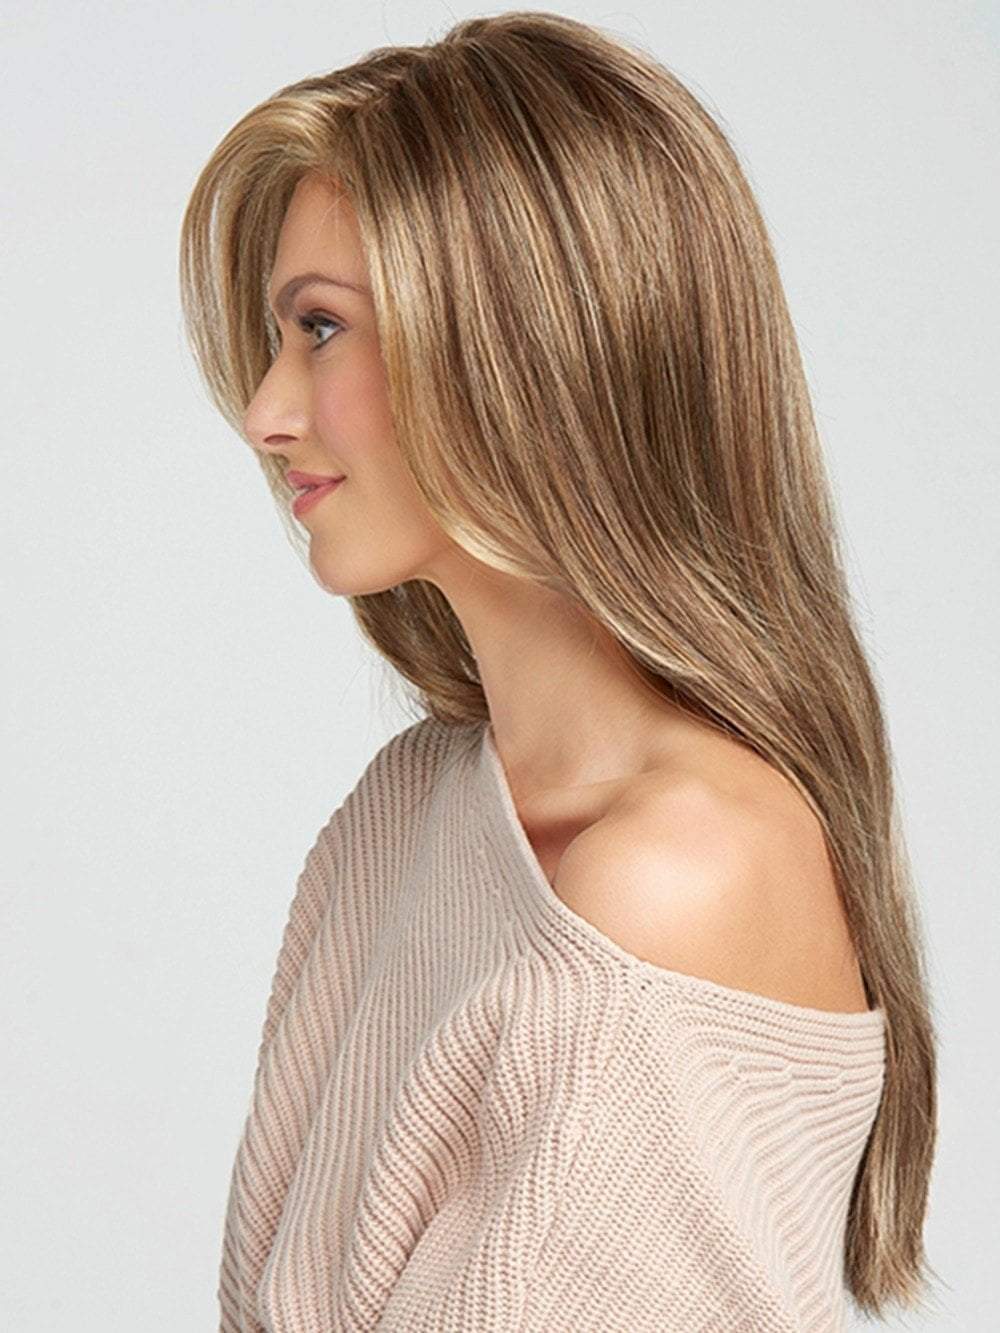 Beautiful long layers that fall to mid-back to create this full, flowing silhouette